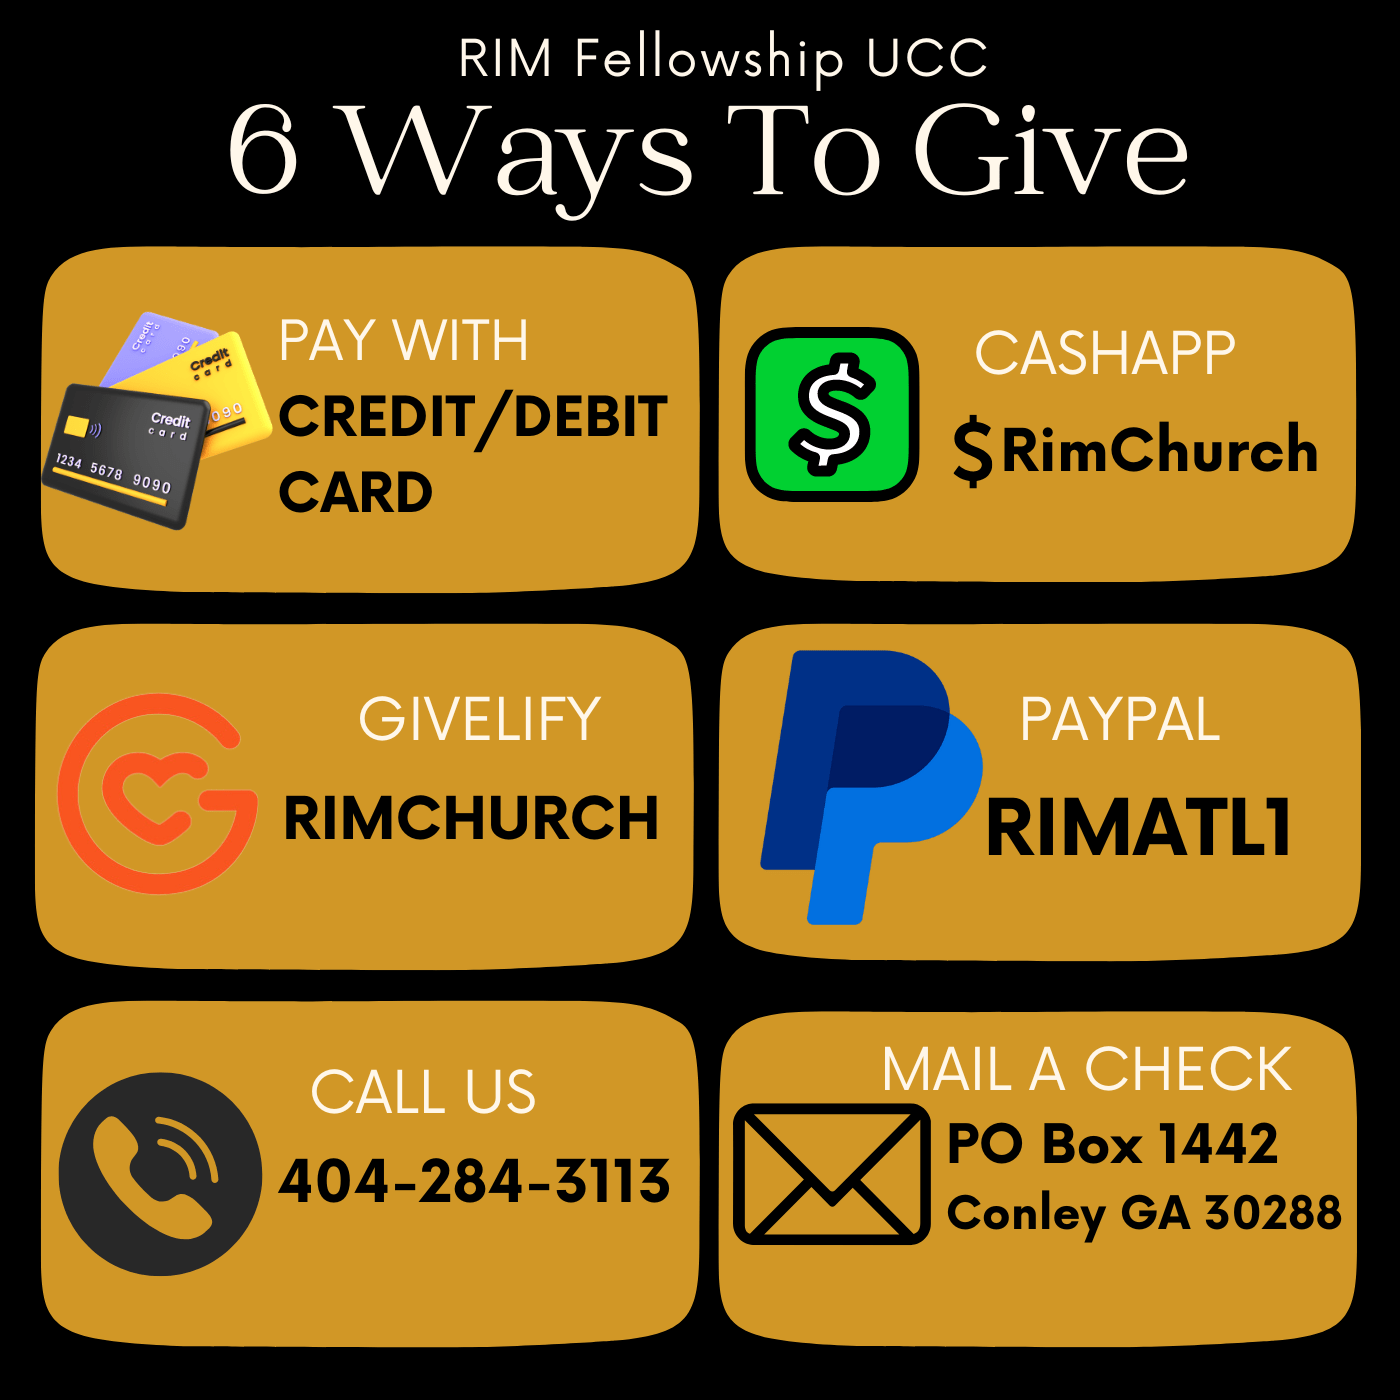 6 Ways To Give (2100 × 2100 px) (2500 × 2500 px) (1400 × 1400 px)